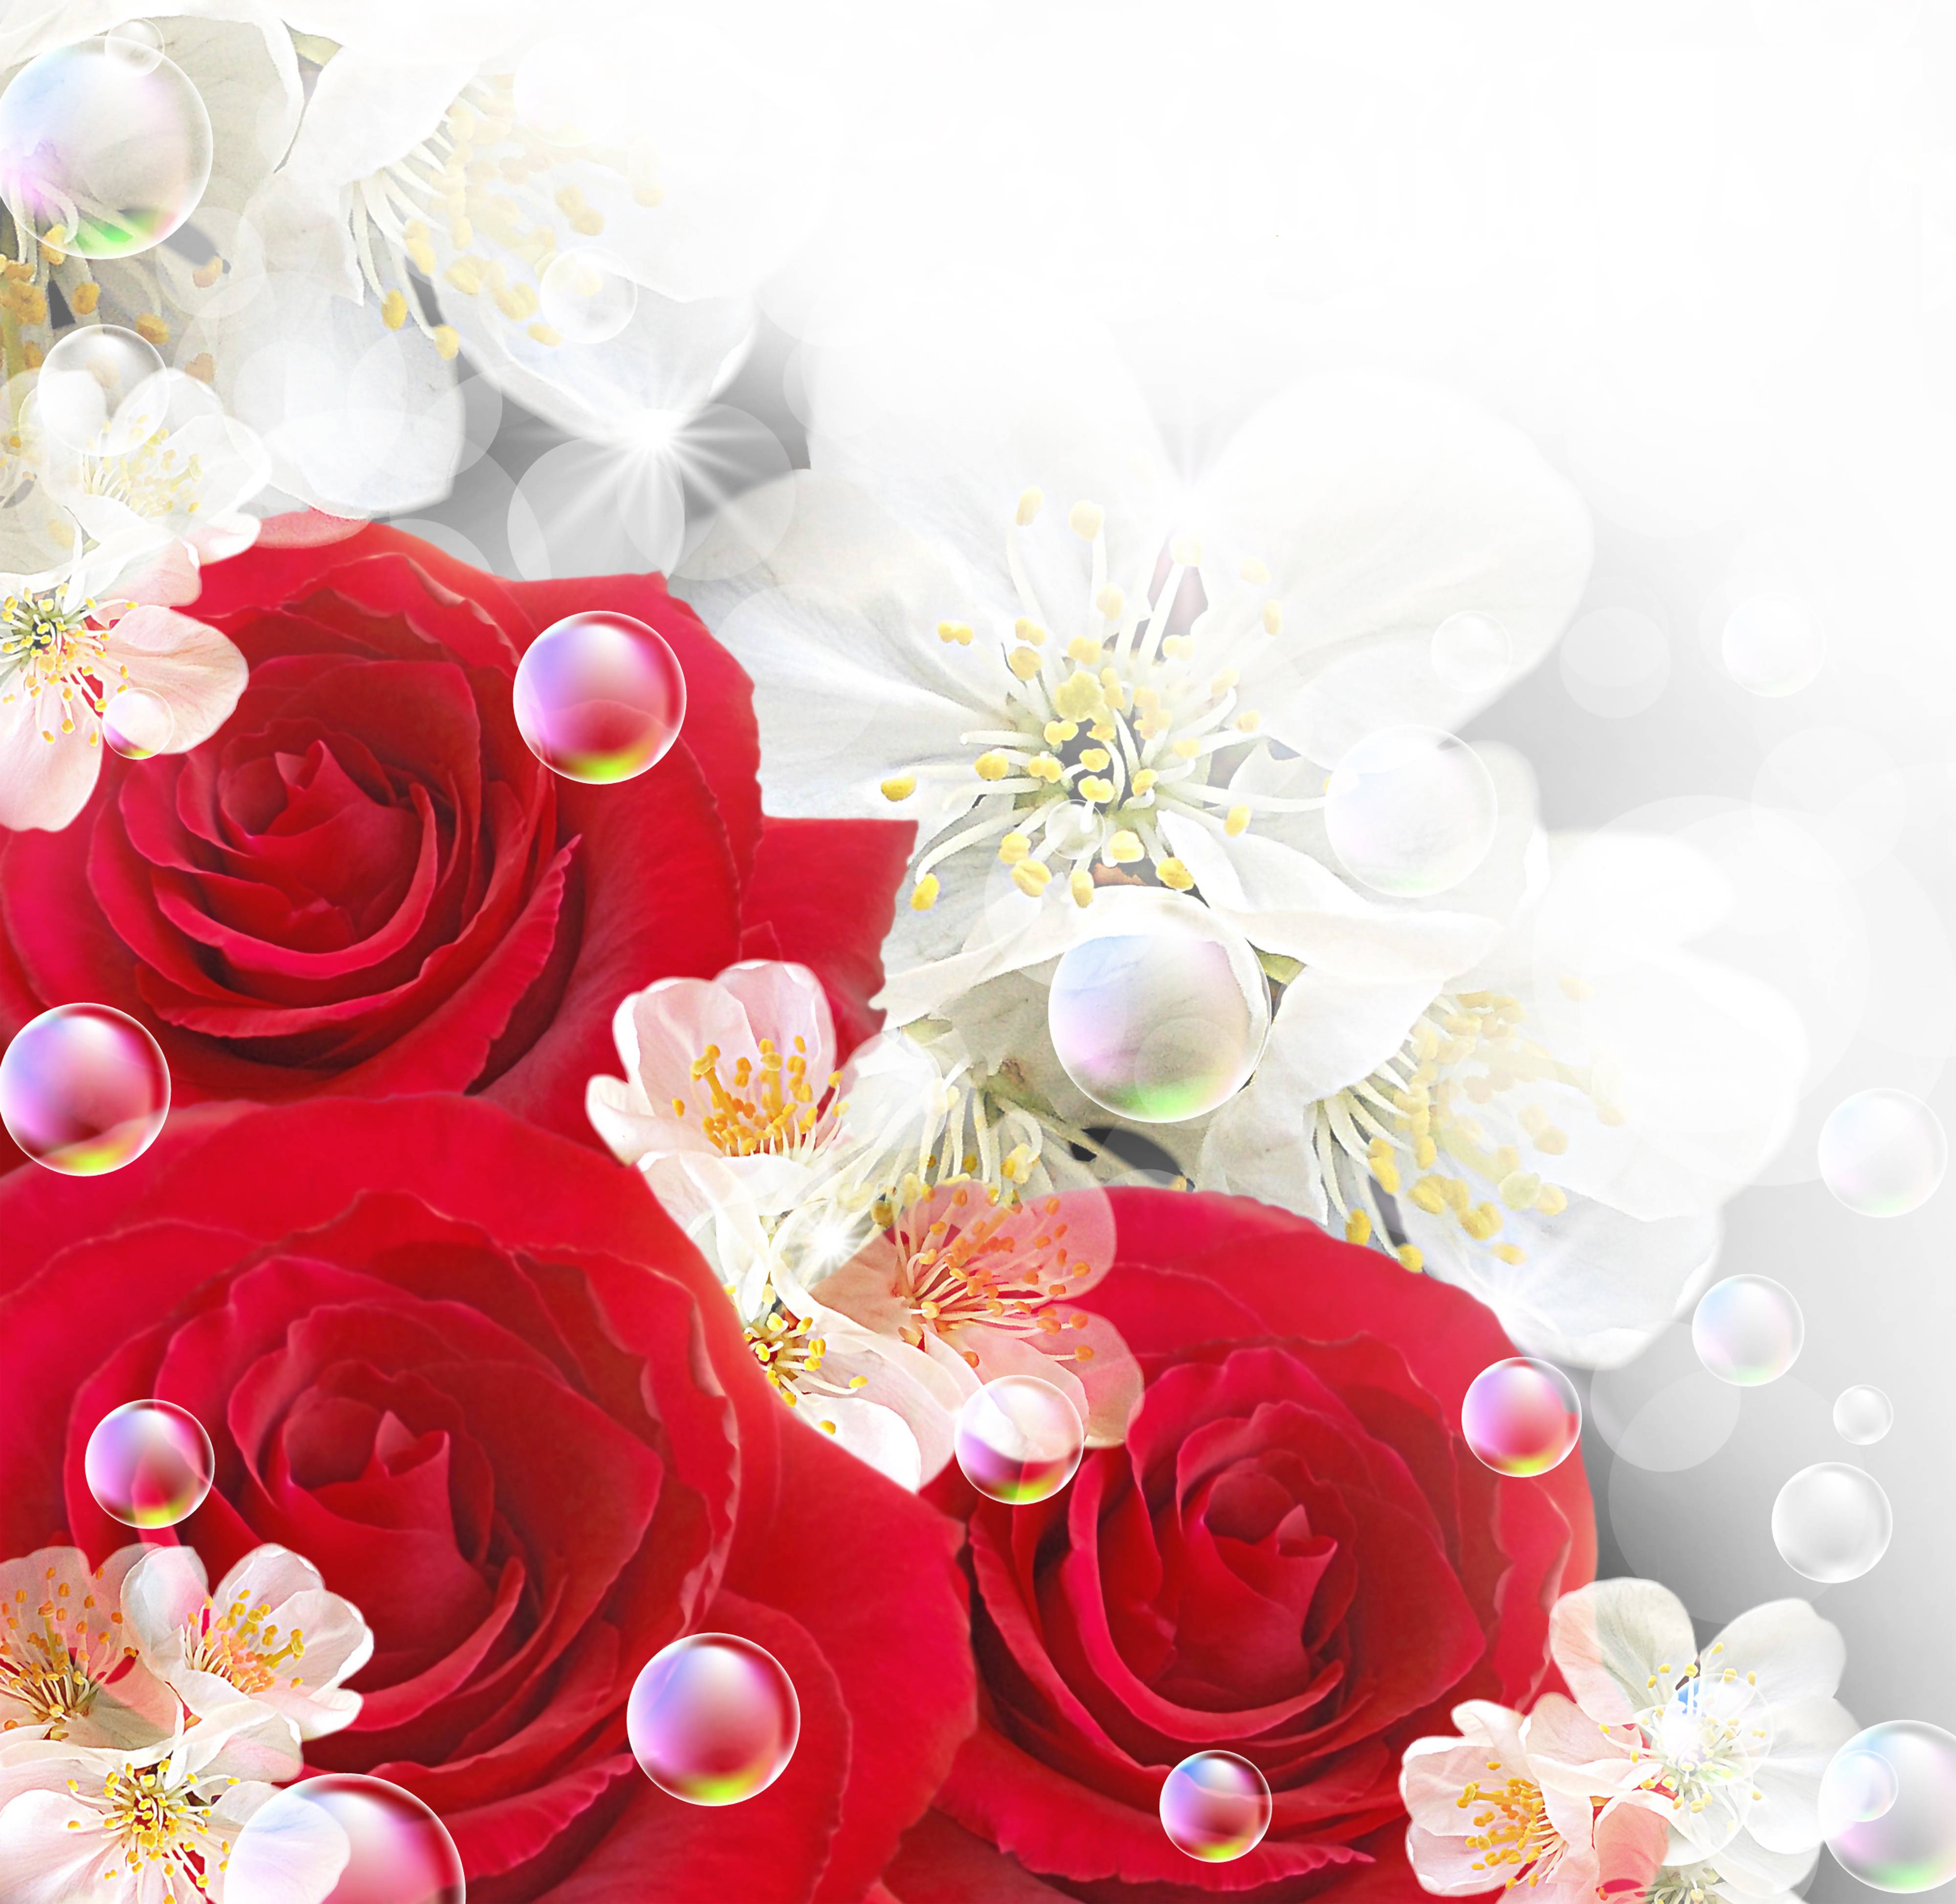 Red Roses With White Background